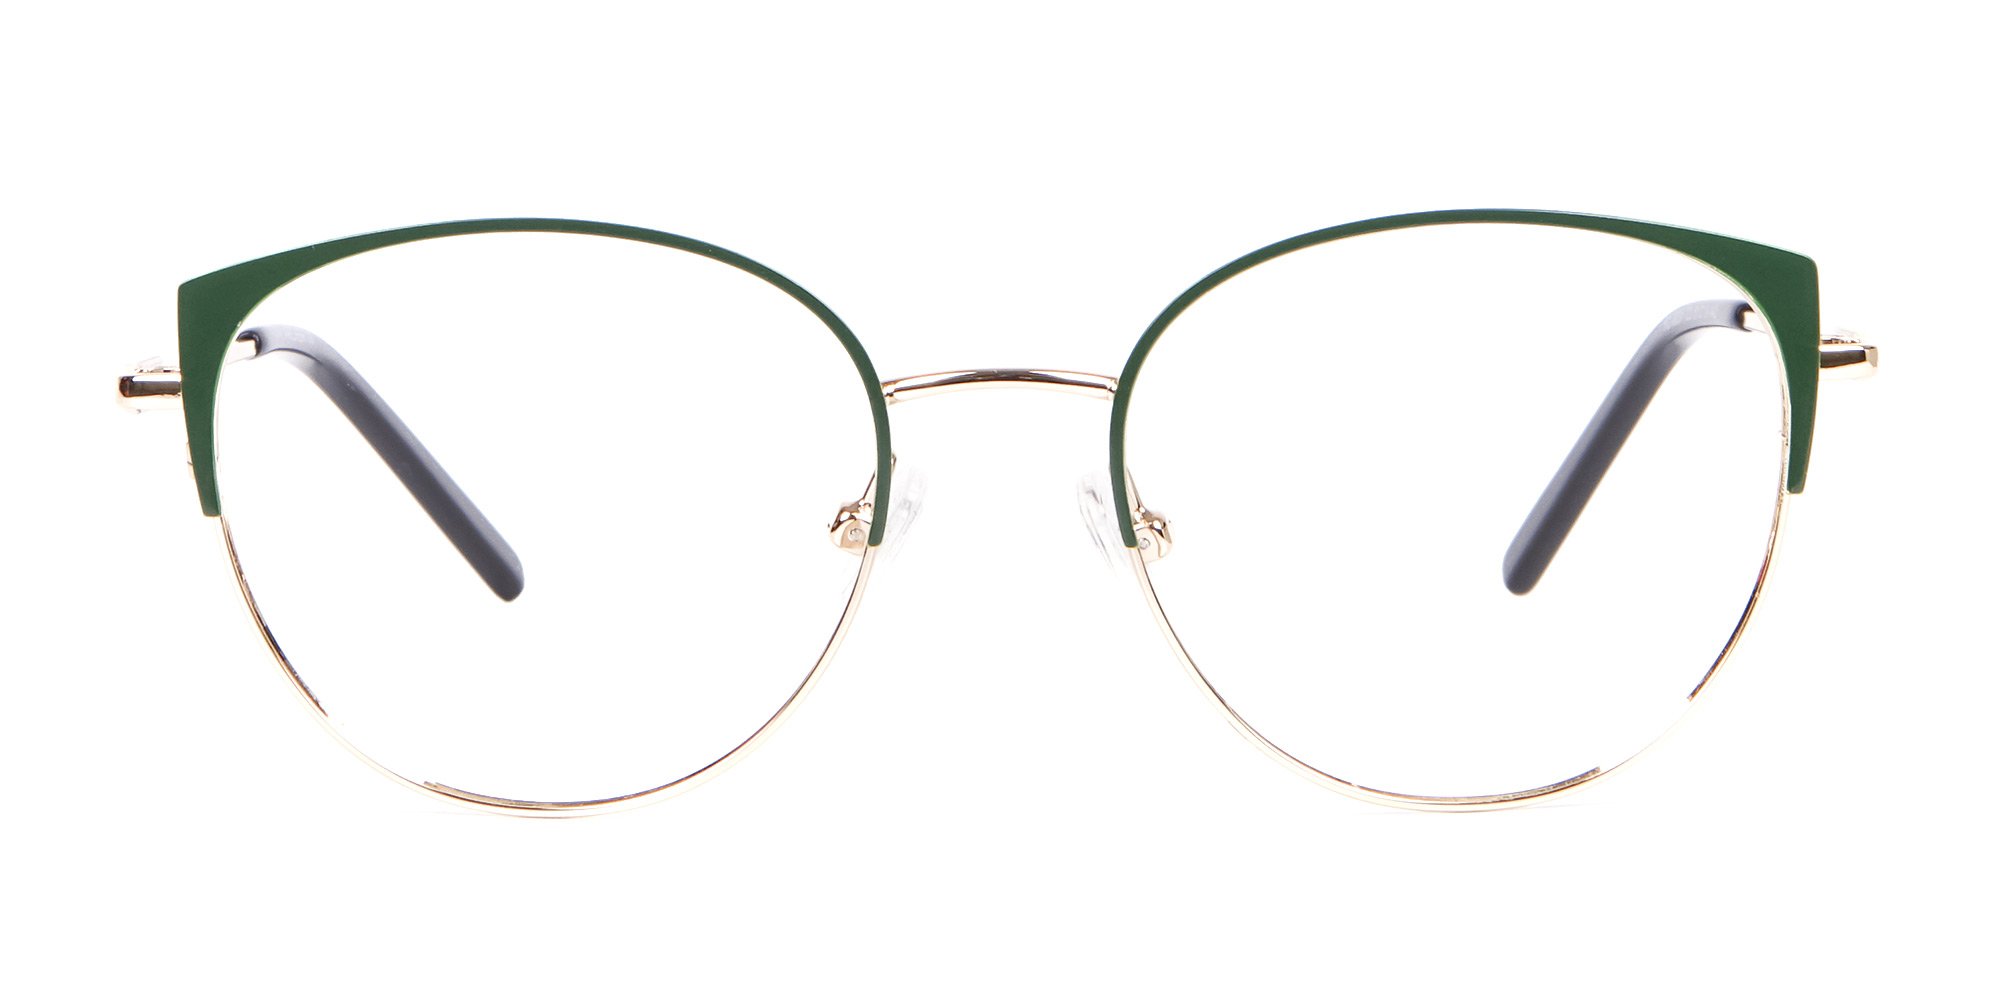 Gold and Hunter Green Metal Glasses